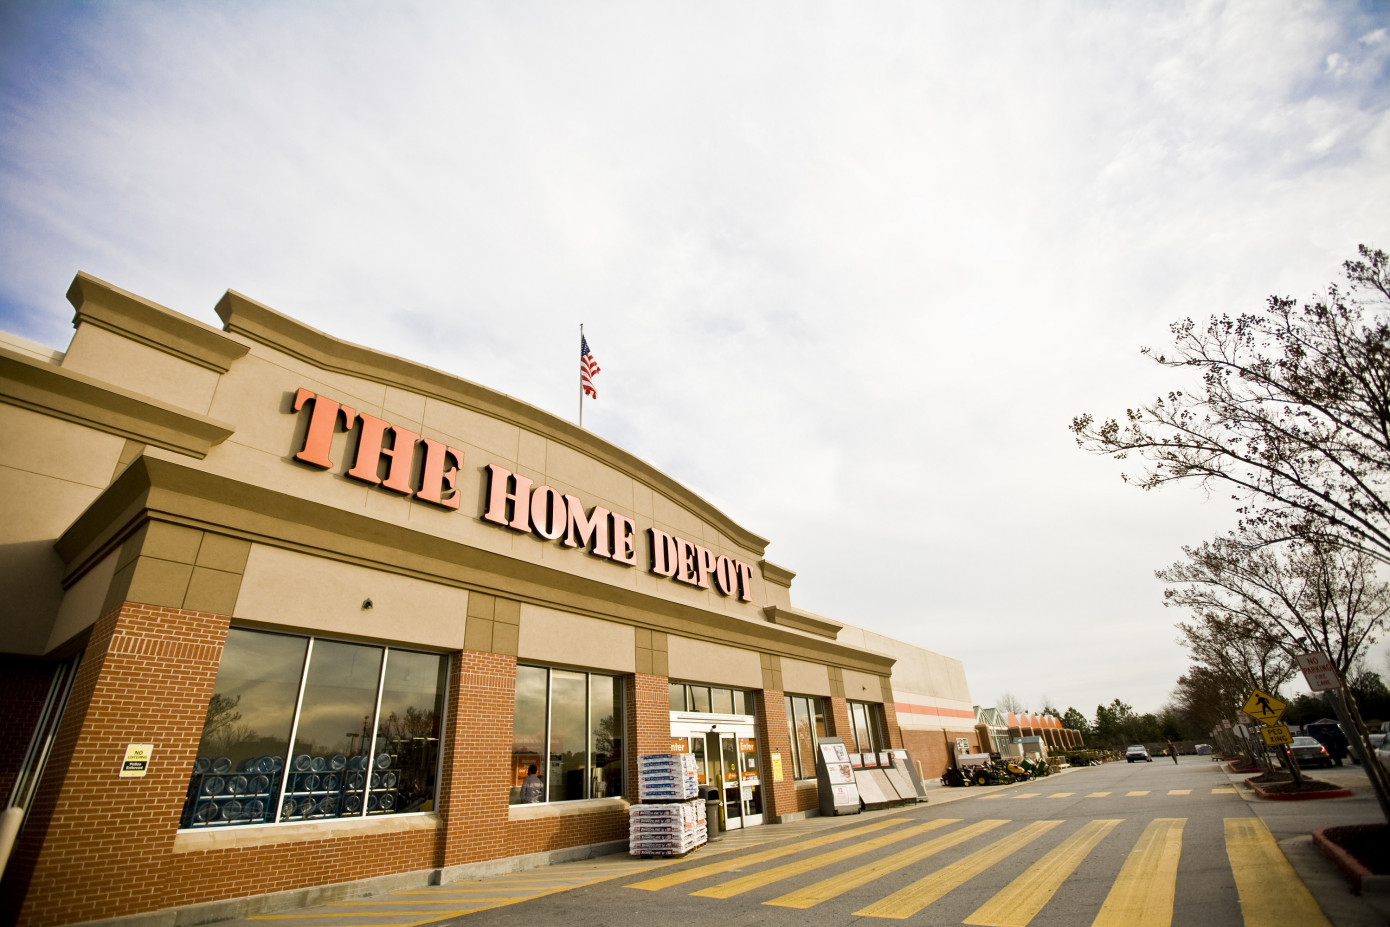 Home Depot expands into professional market with $18 billion acquisition